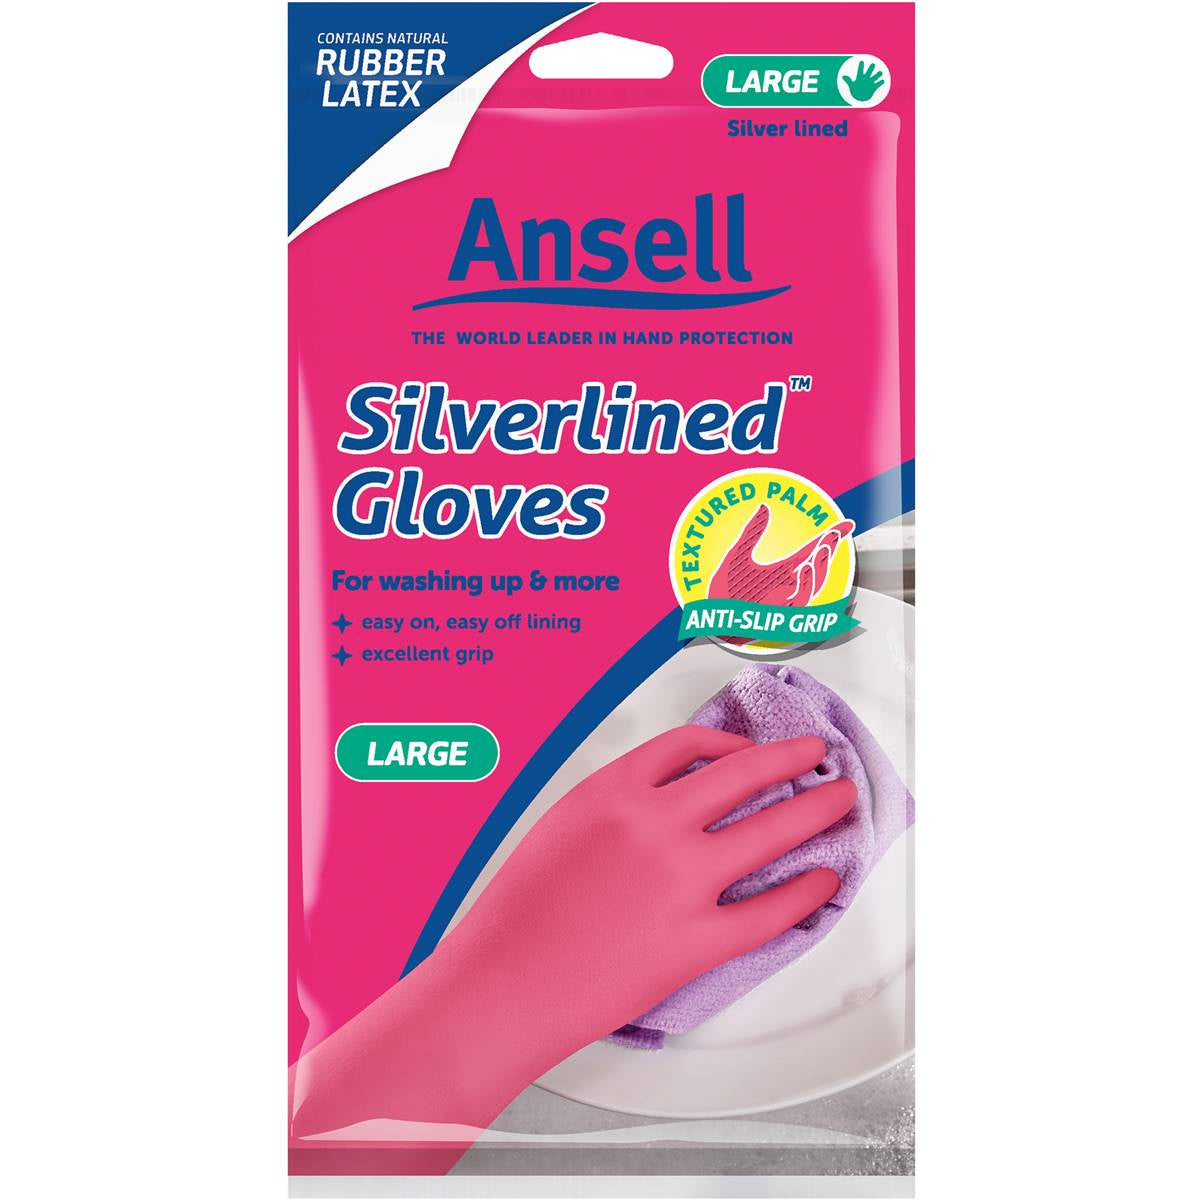 Ansell Silverlined Gloves Large